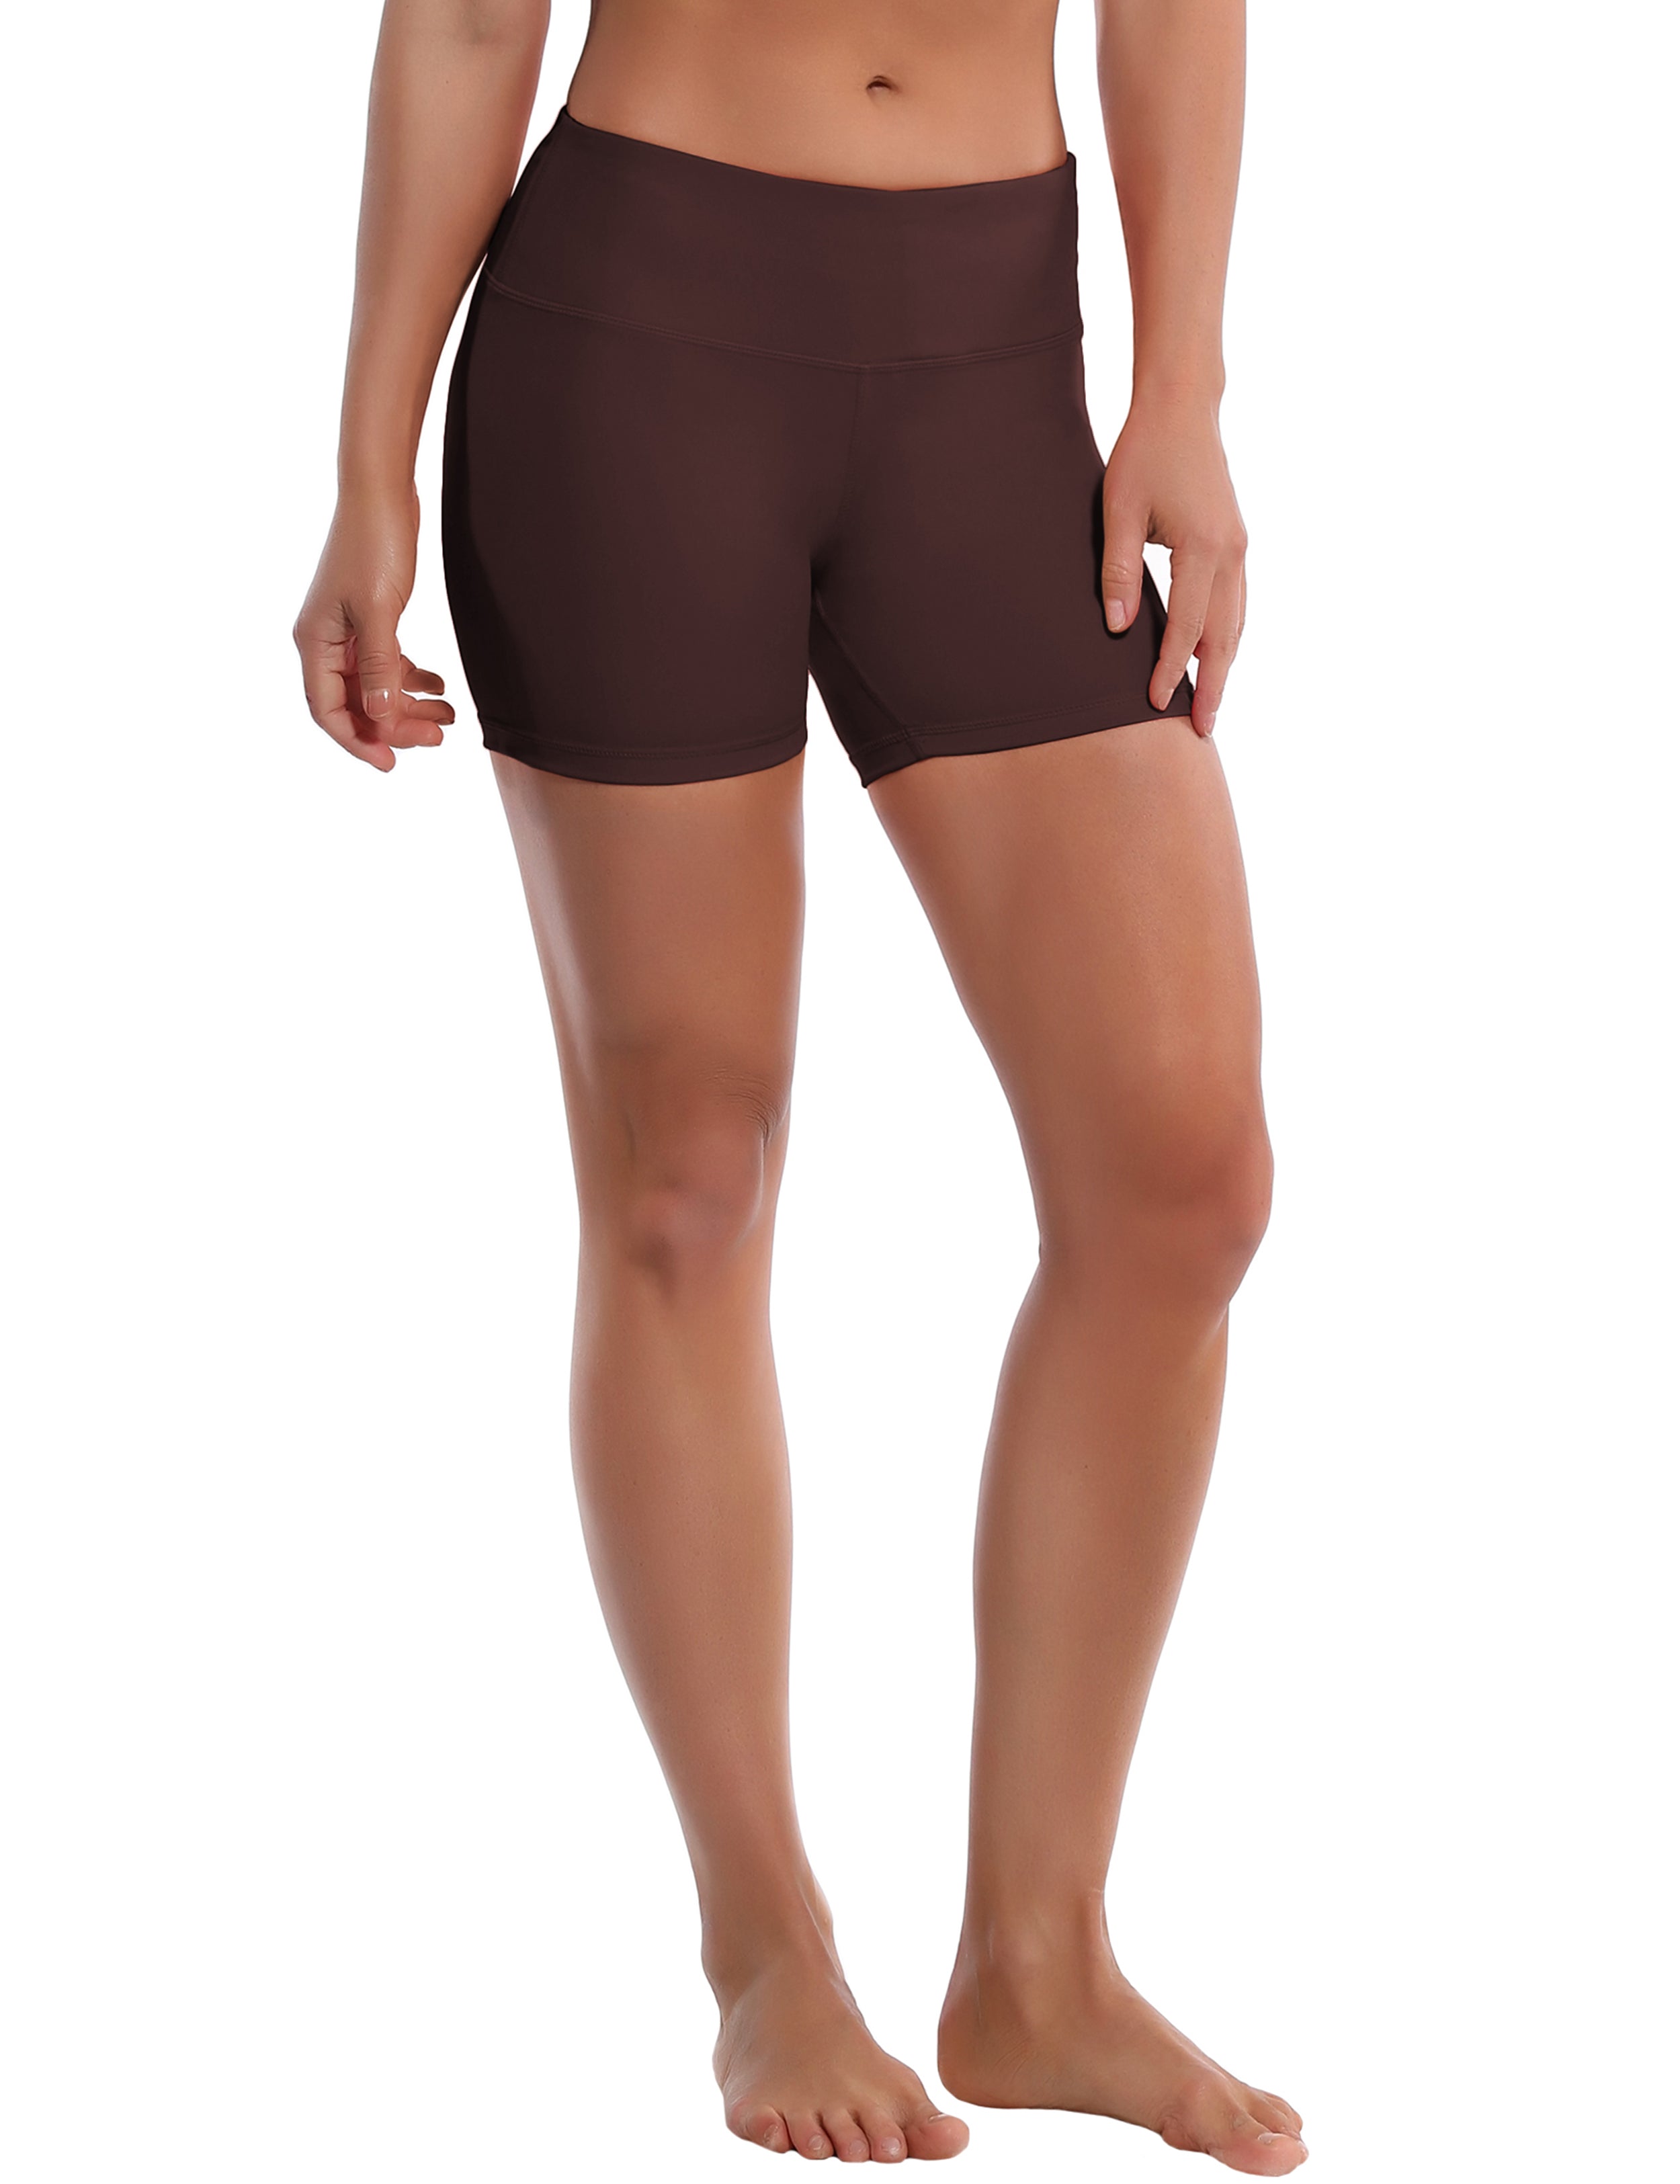 4" Jogging Shorts mahoganymaroon Sleek, soft, smooth and totally comfortable: our newest style is here. Softest-ever fabric High elasticity High density 4-way stretch Fabric doesn't attract lint easily No see-through Moisture-wicking Machine wash 75% Nylon, 25% Spandex